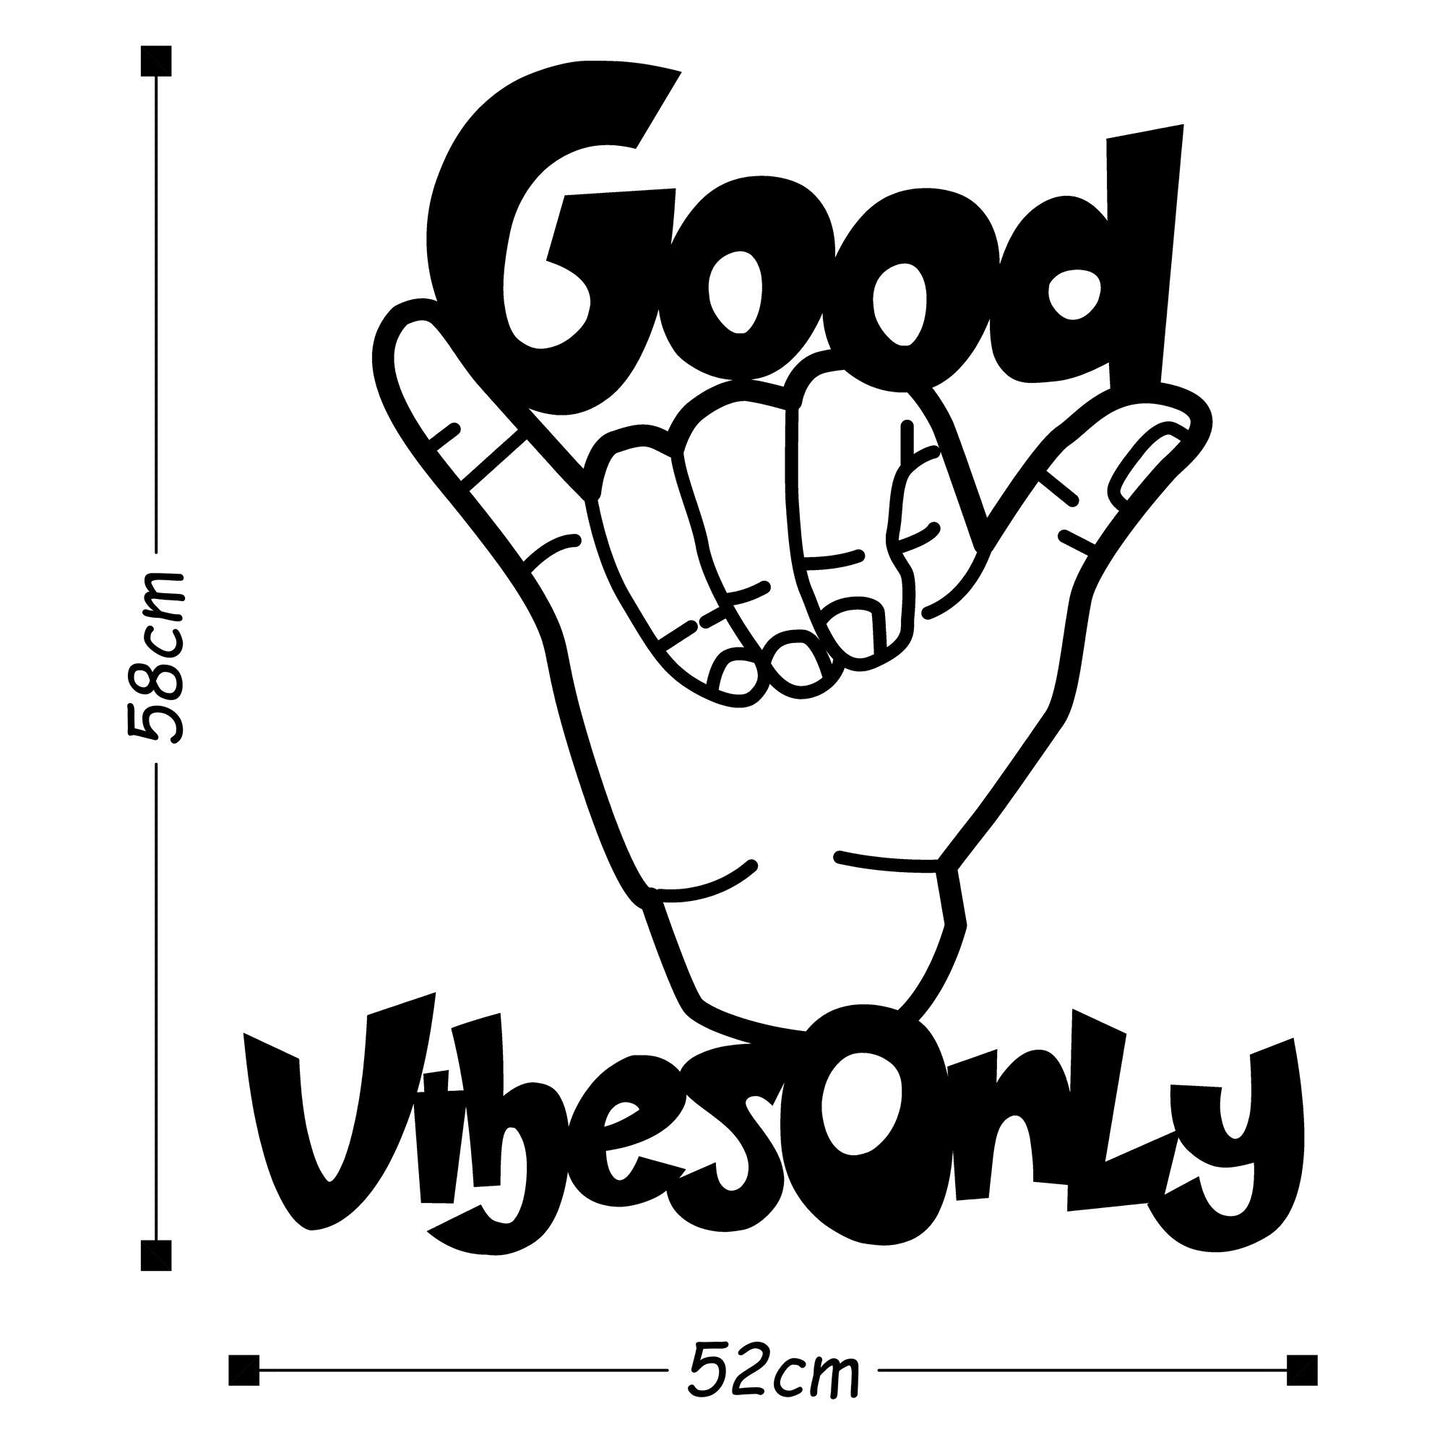 Good Vibes Only - Decorative Metal Wall Accessory